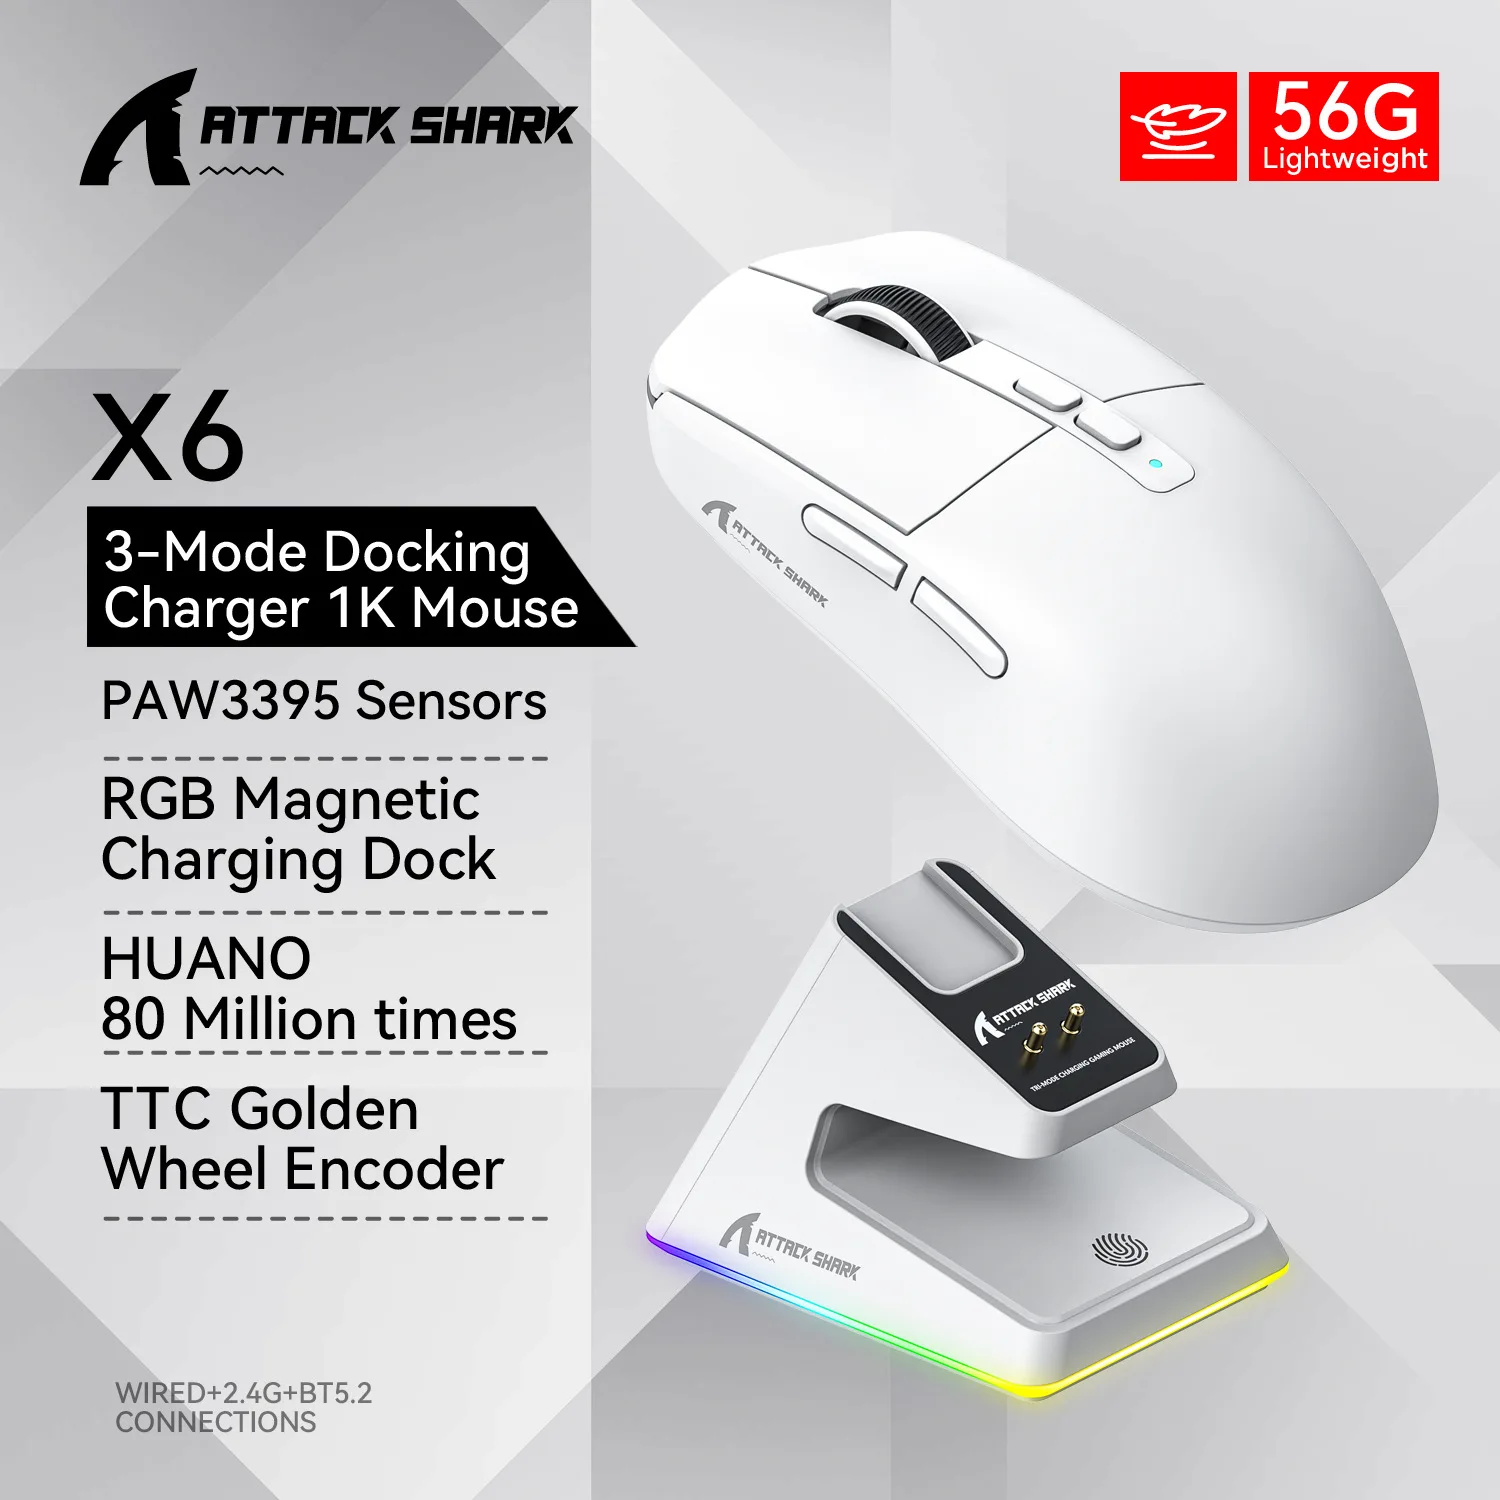 https://ae01.alicdn.com/kf/S16df617f160f495d8ec6e0902063400cS/Attack-Shark-X6-Wireless-Gaming-Mouse-2-4G-Bluetooth-Wired-3-Mode-Lighetweight-Mouse-26K-DPI.jpg